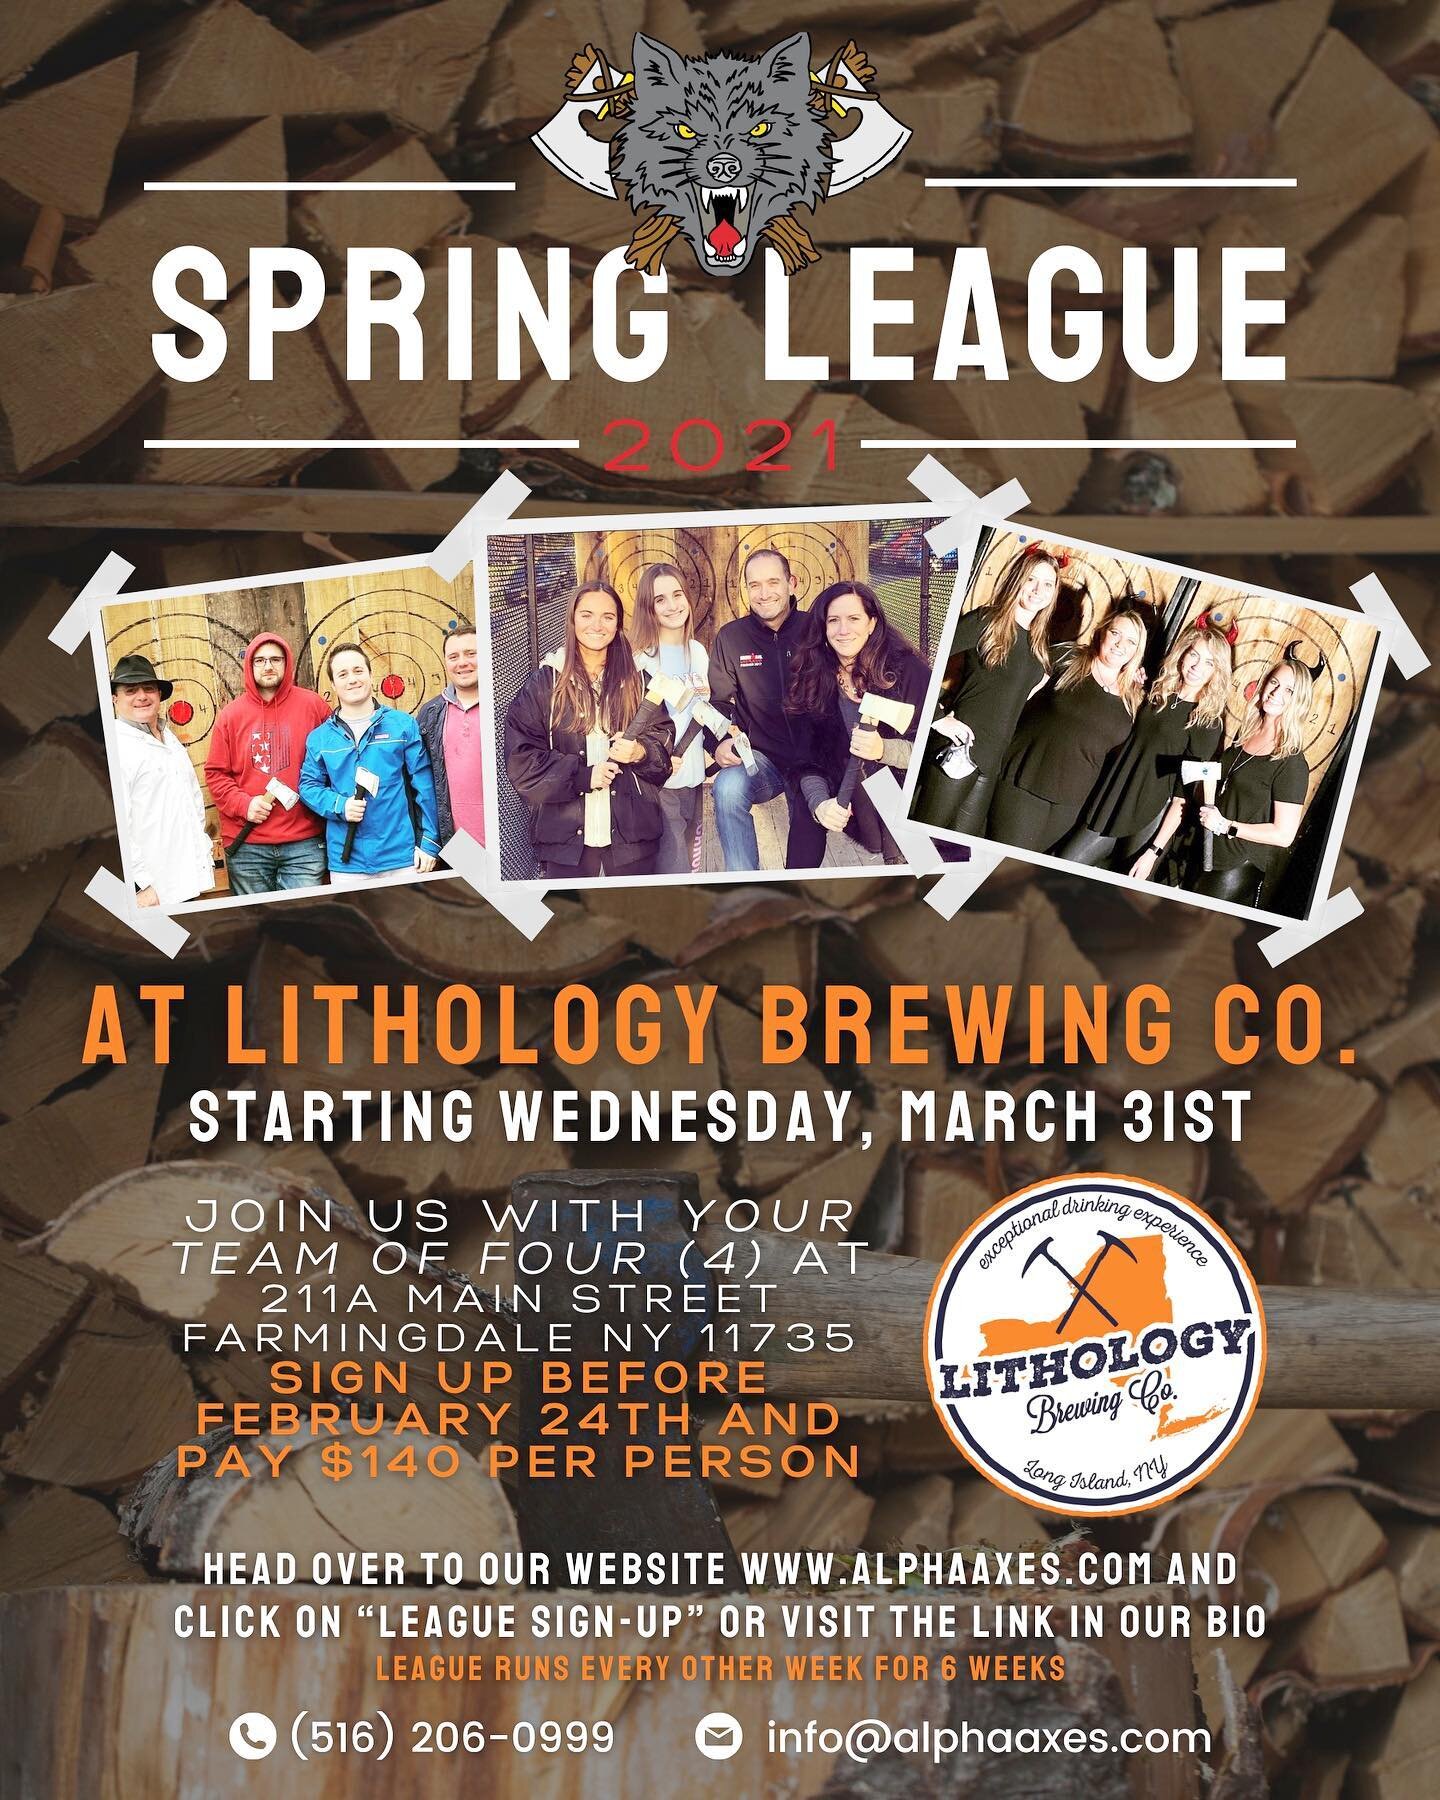 👆🏻Try something NEW this year and join our axe throwing league! Teams of 4 &amp; beginners are welcome! 
.
.
The league @lithologybrewing will now start on March 31st with special pricing extended to February 24th! Don&rsquo;t wait to sign up! T-sh